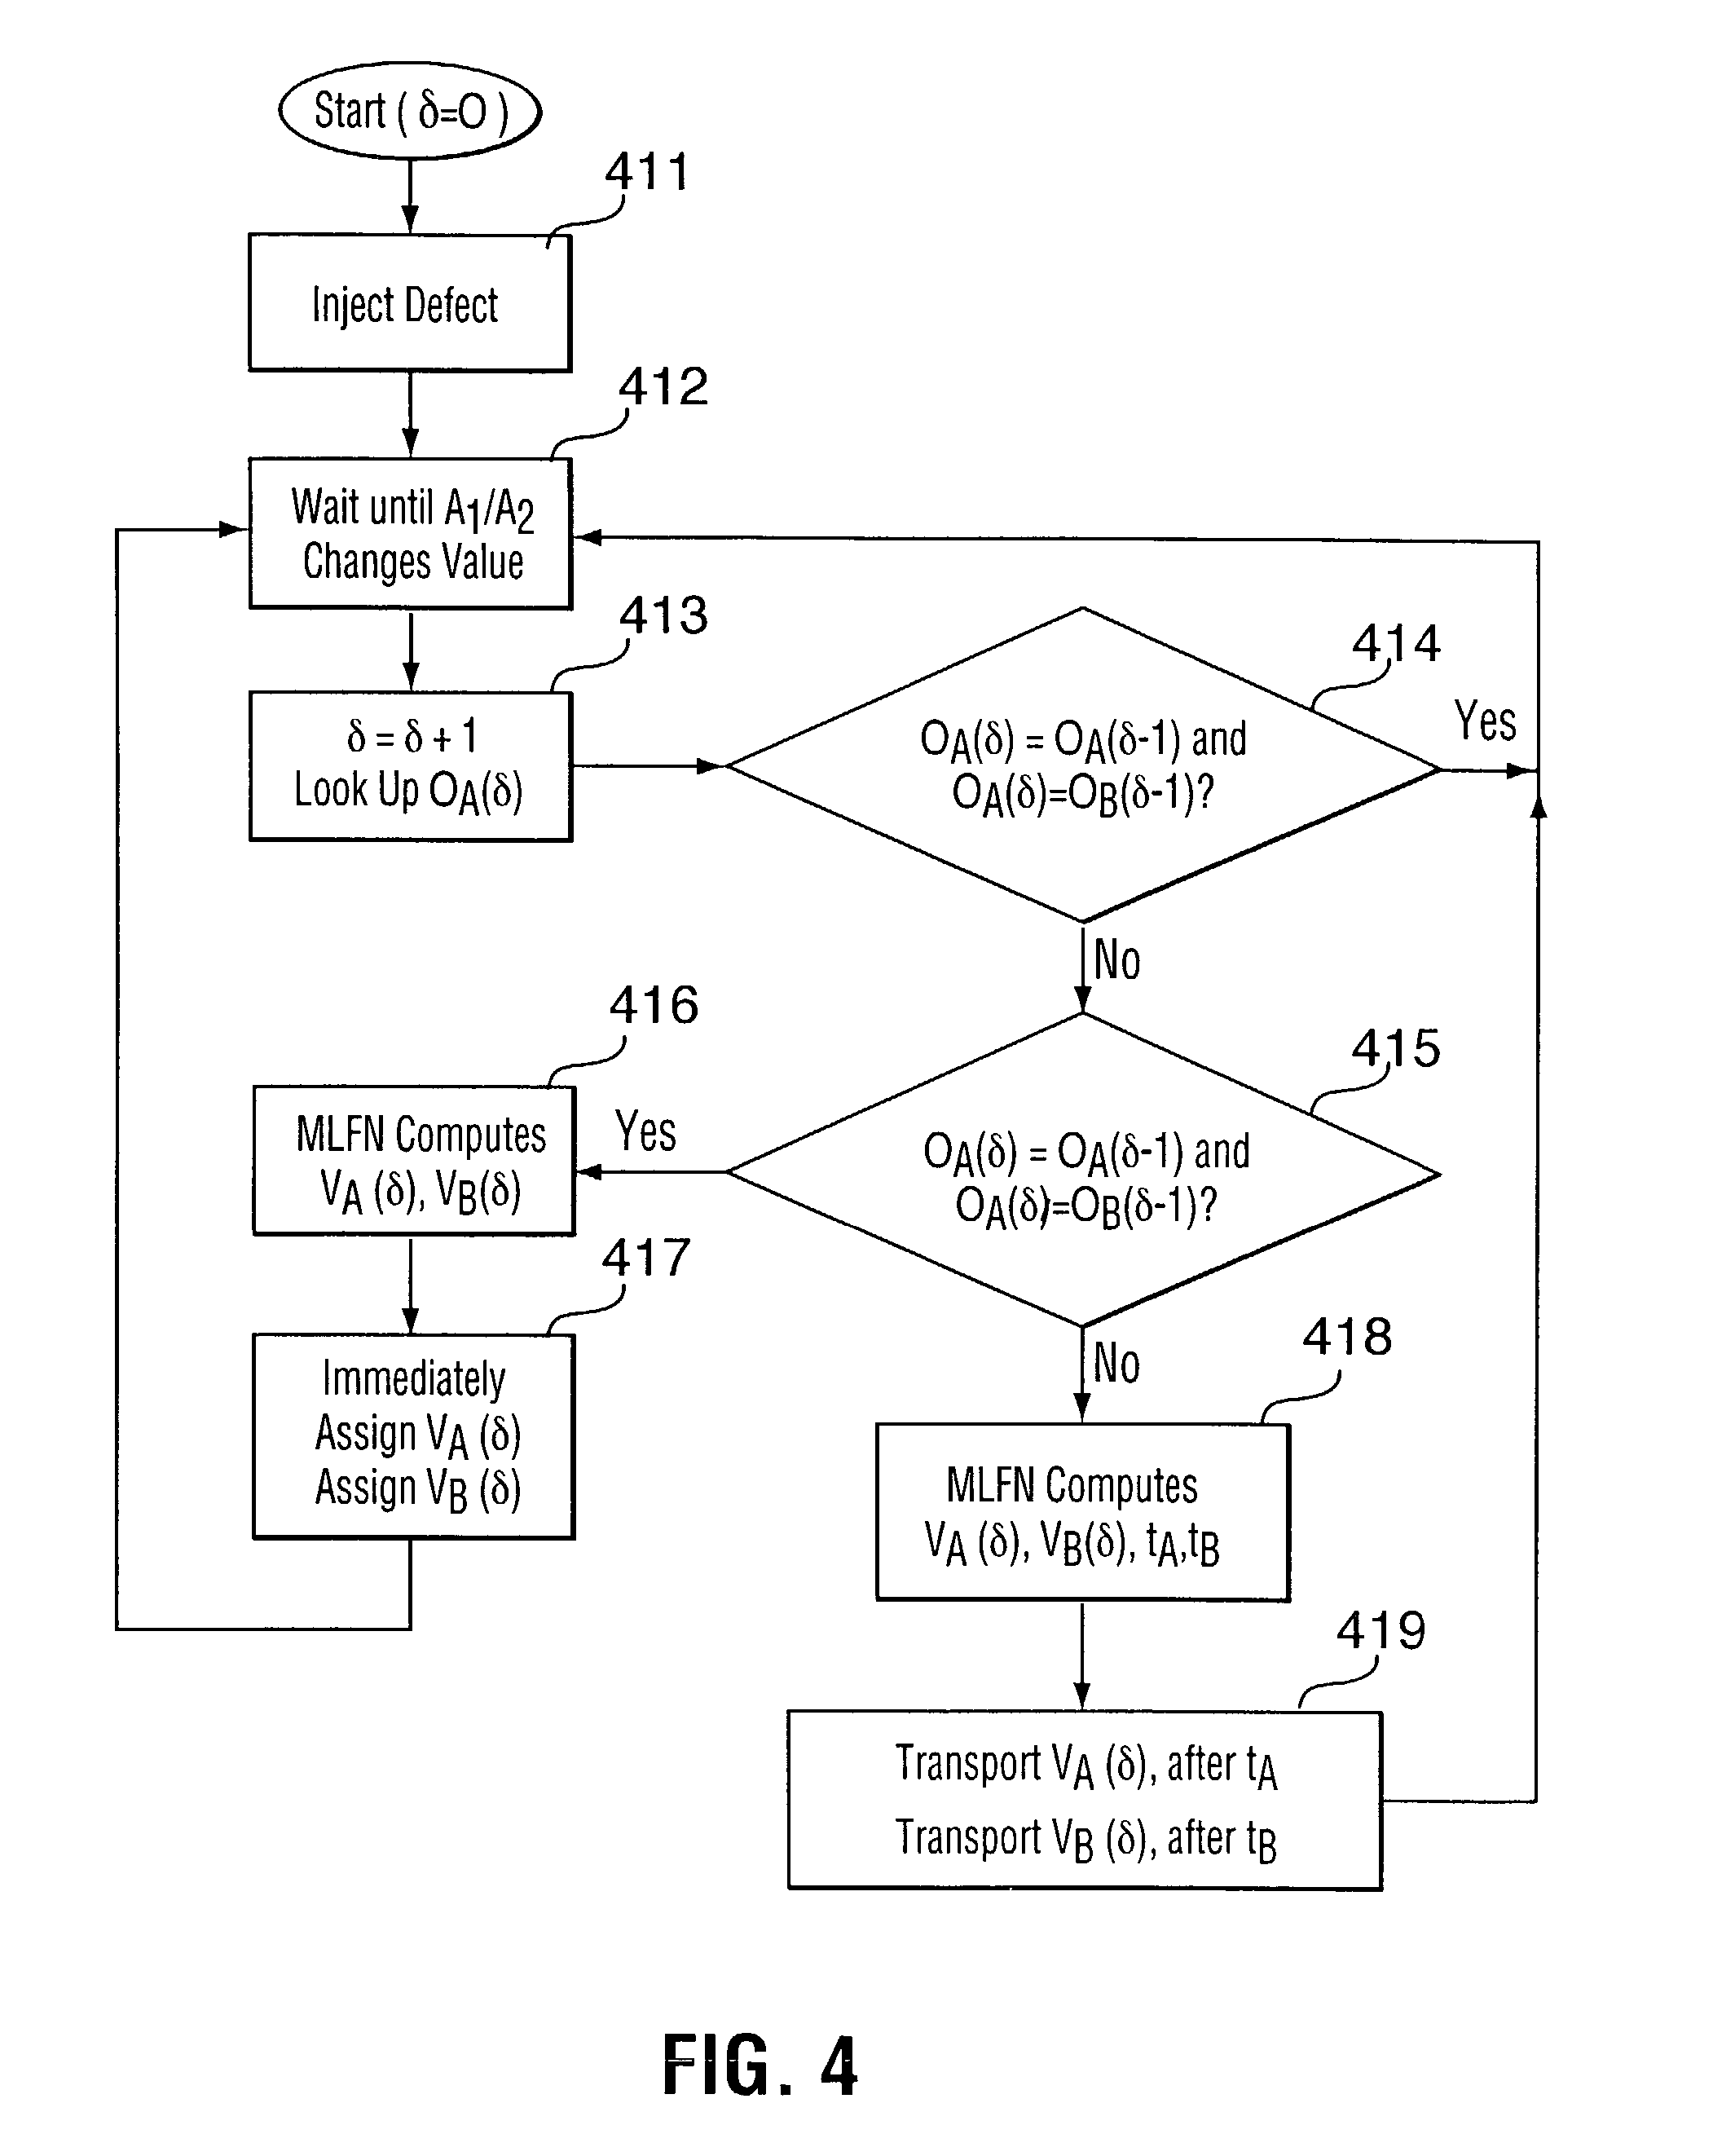 Method and apparatus for modeling and simulating the effects of bridge defects in integrated circuits